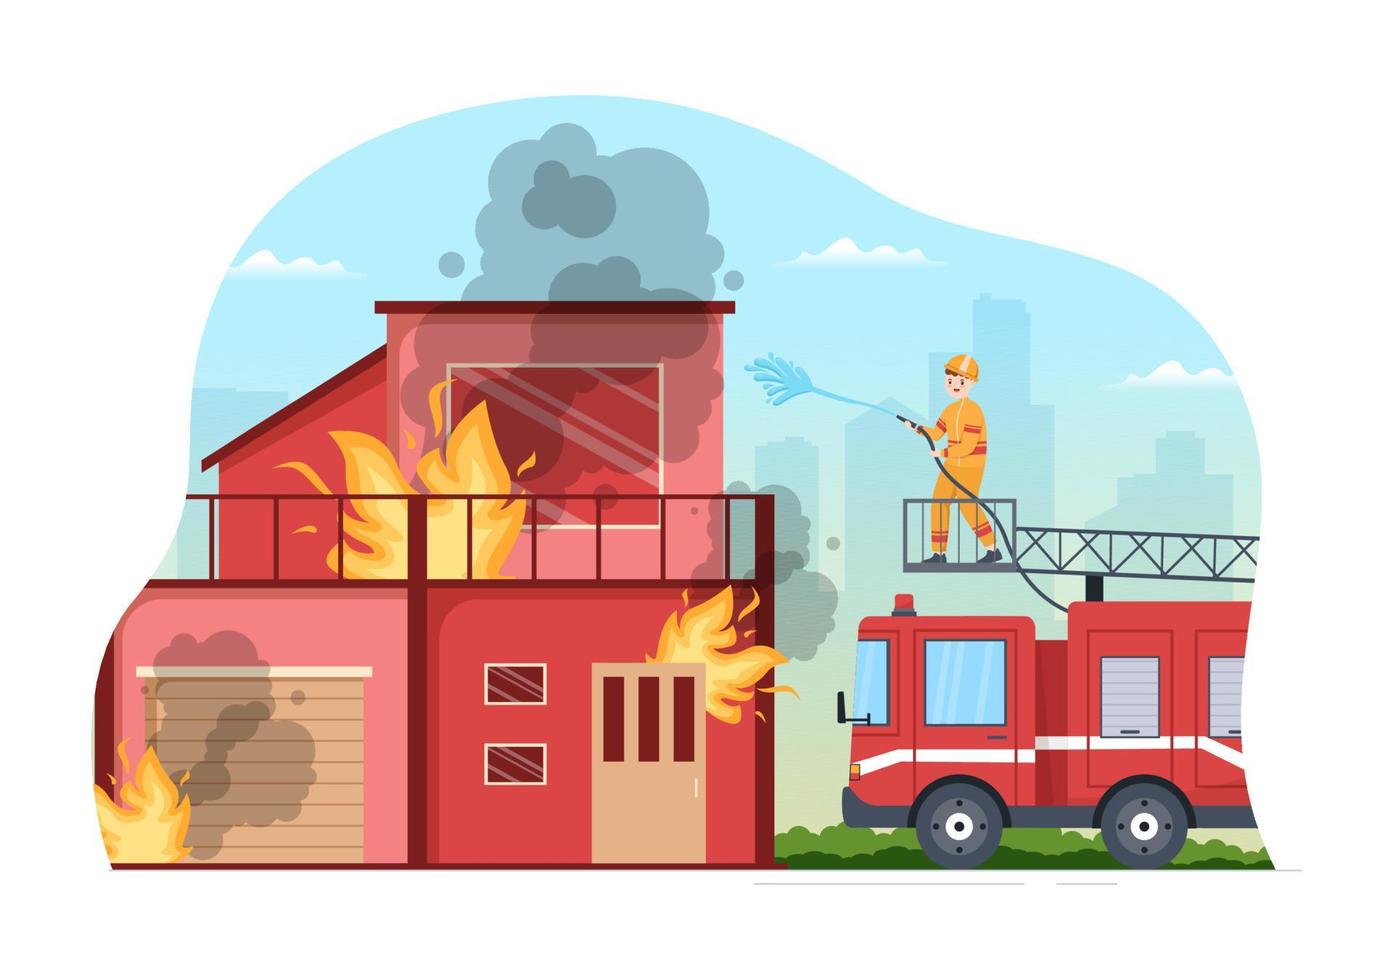 Fire Department with Firefighters Extinguishing House, Forest and Helping People in Various Situations in Flat Hand Drawn Cartoon Illustration vector